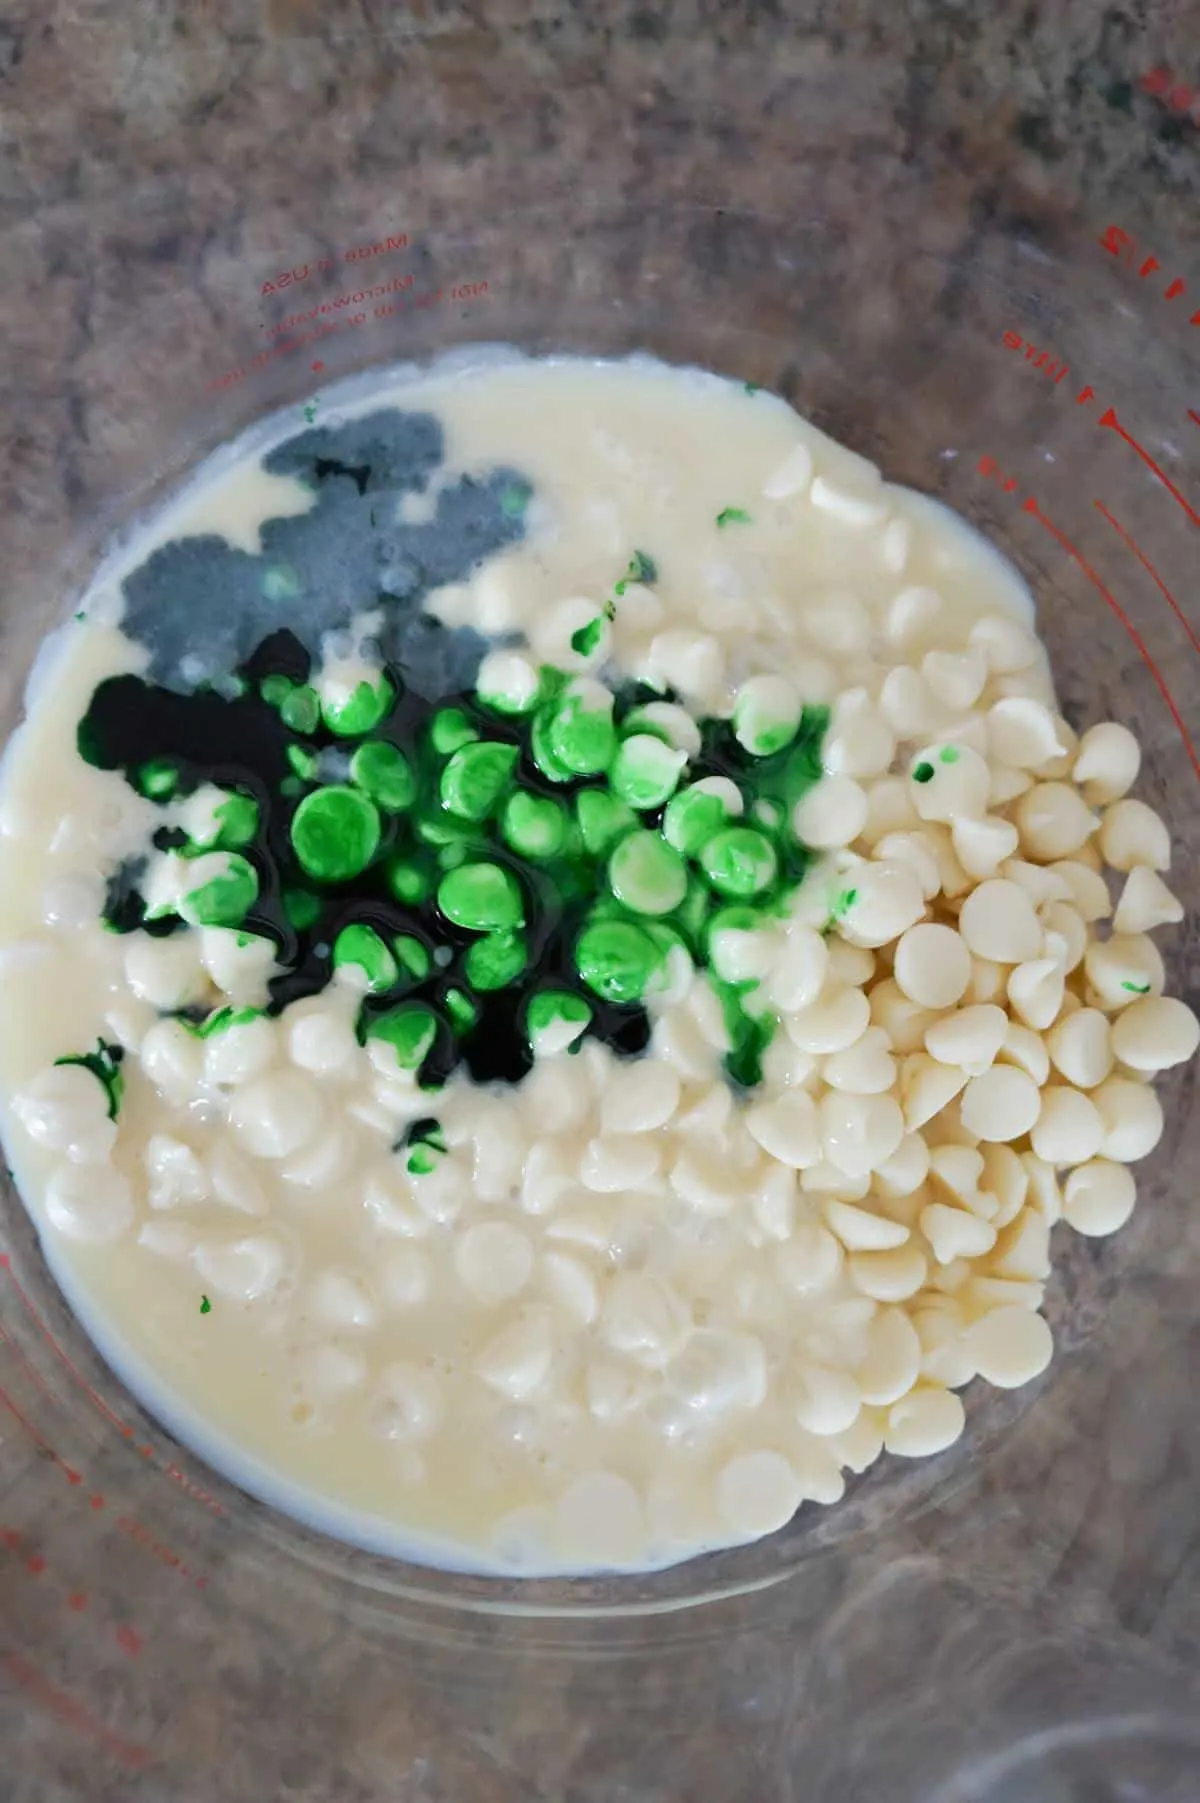 green food colouring, white chocolate chips and sweetened condensed milk in a glass bowl